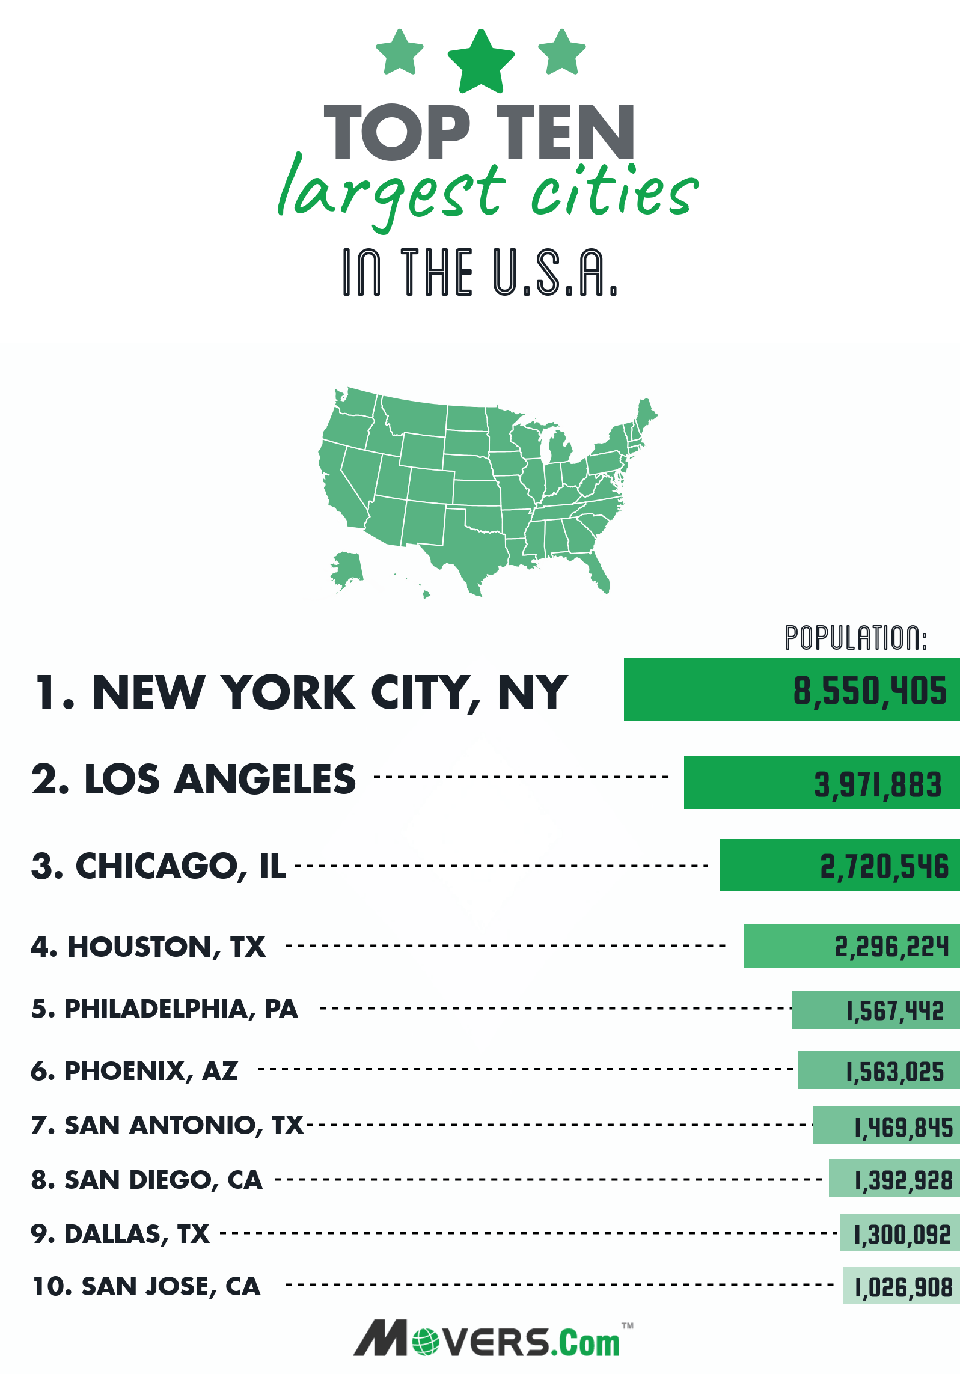 min pulsåre overskridelsen Top 10 Largest Cities in the United States - Movers.com